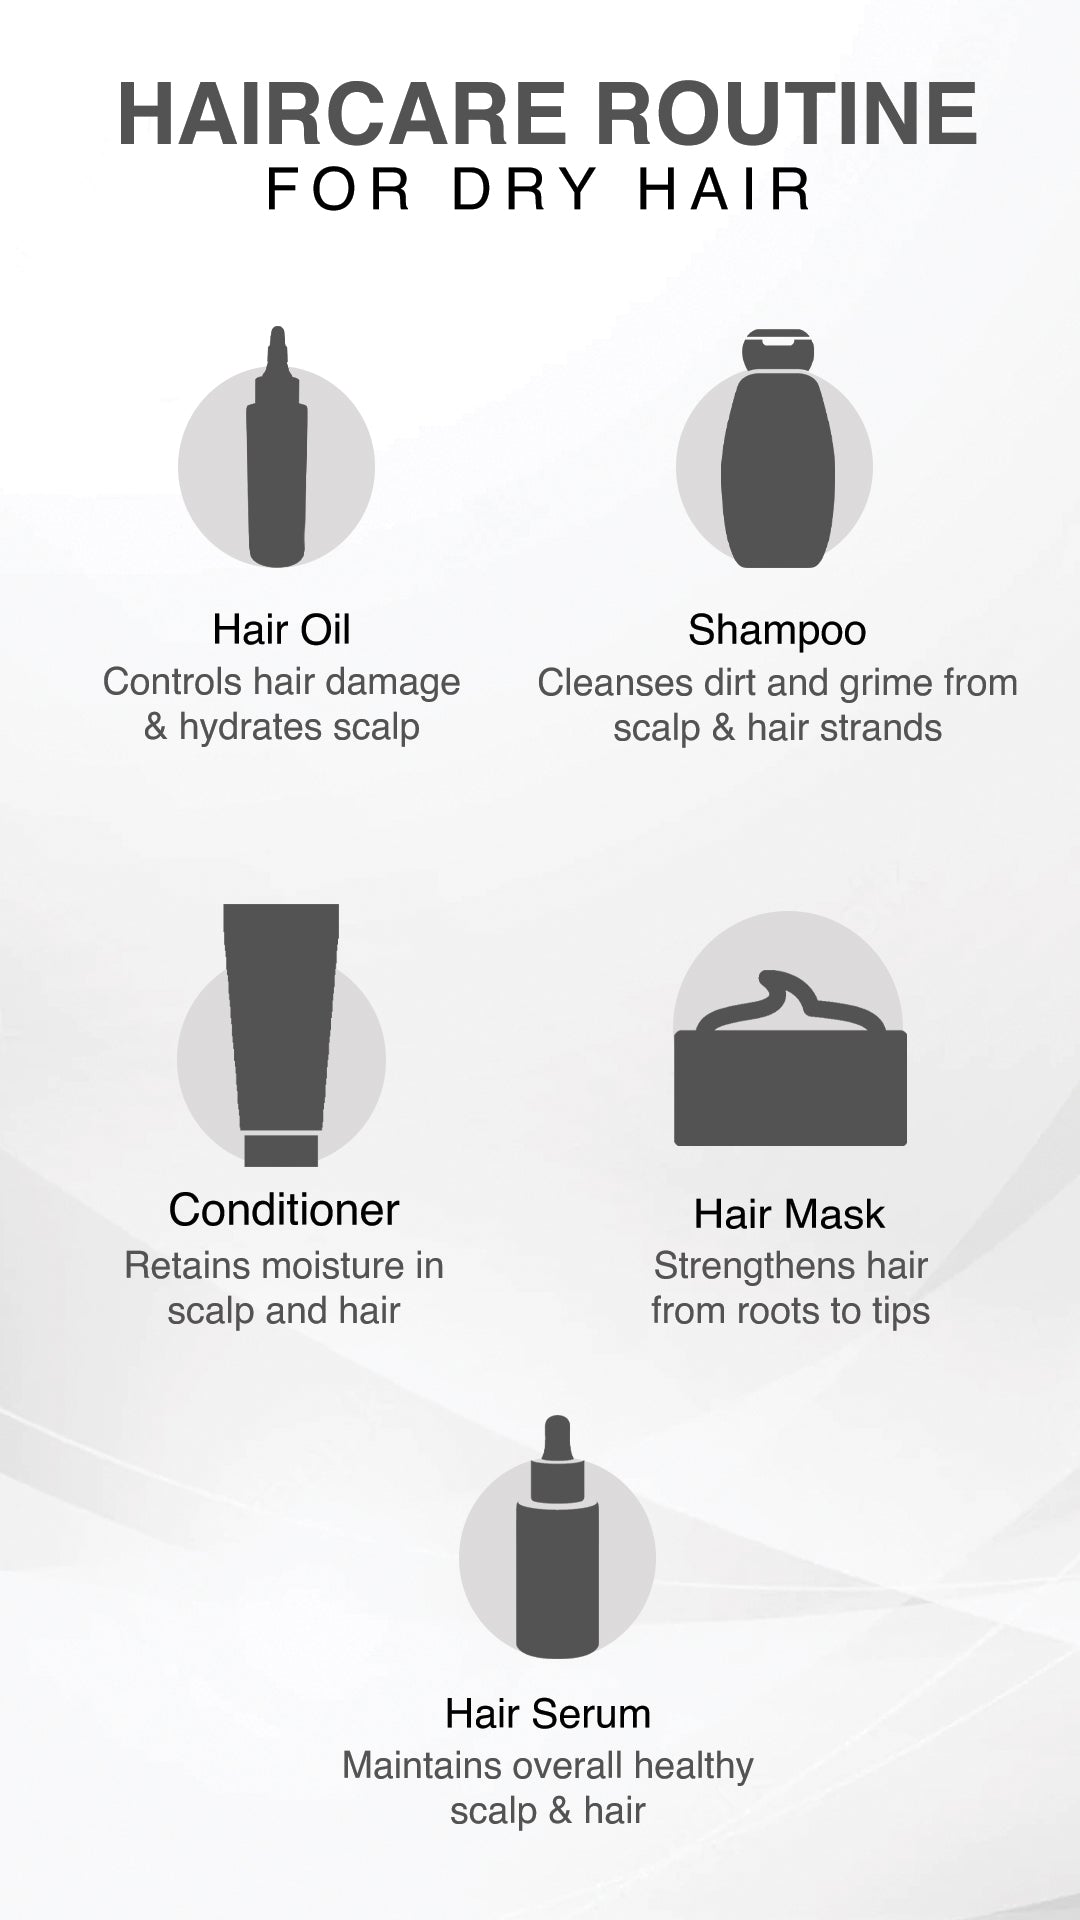 Hair care routine for dry hair